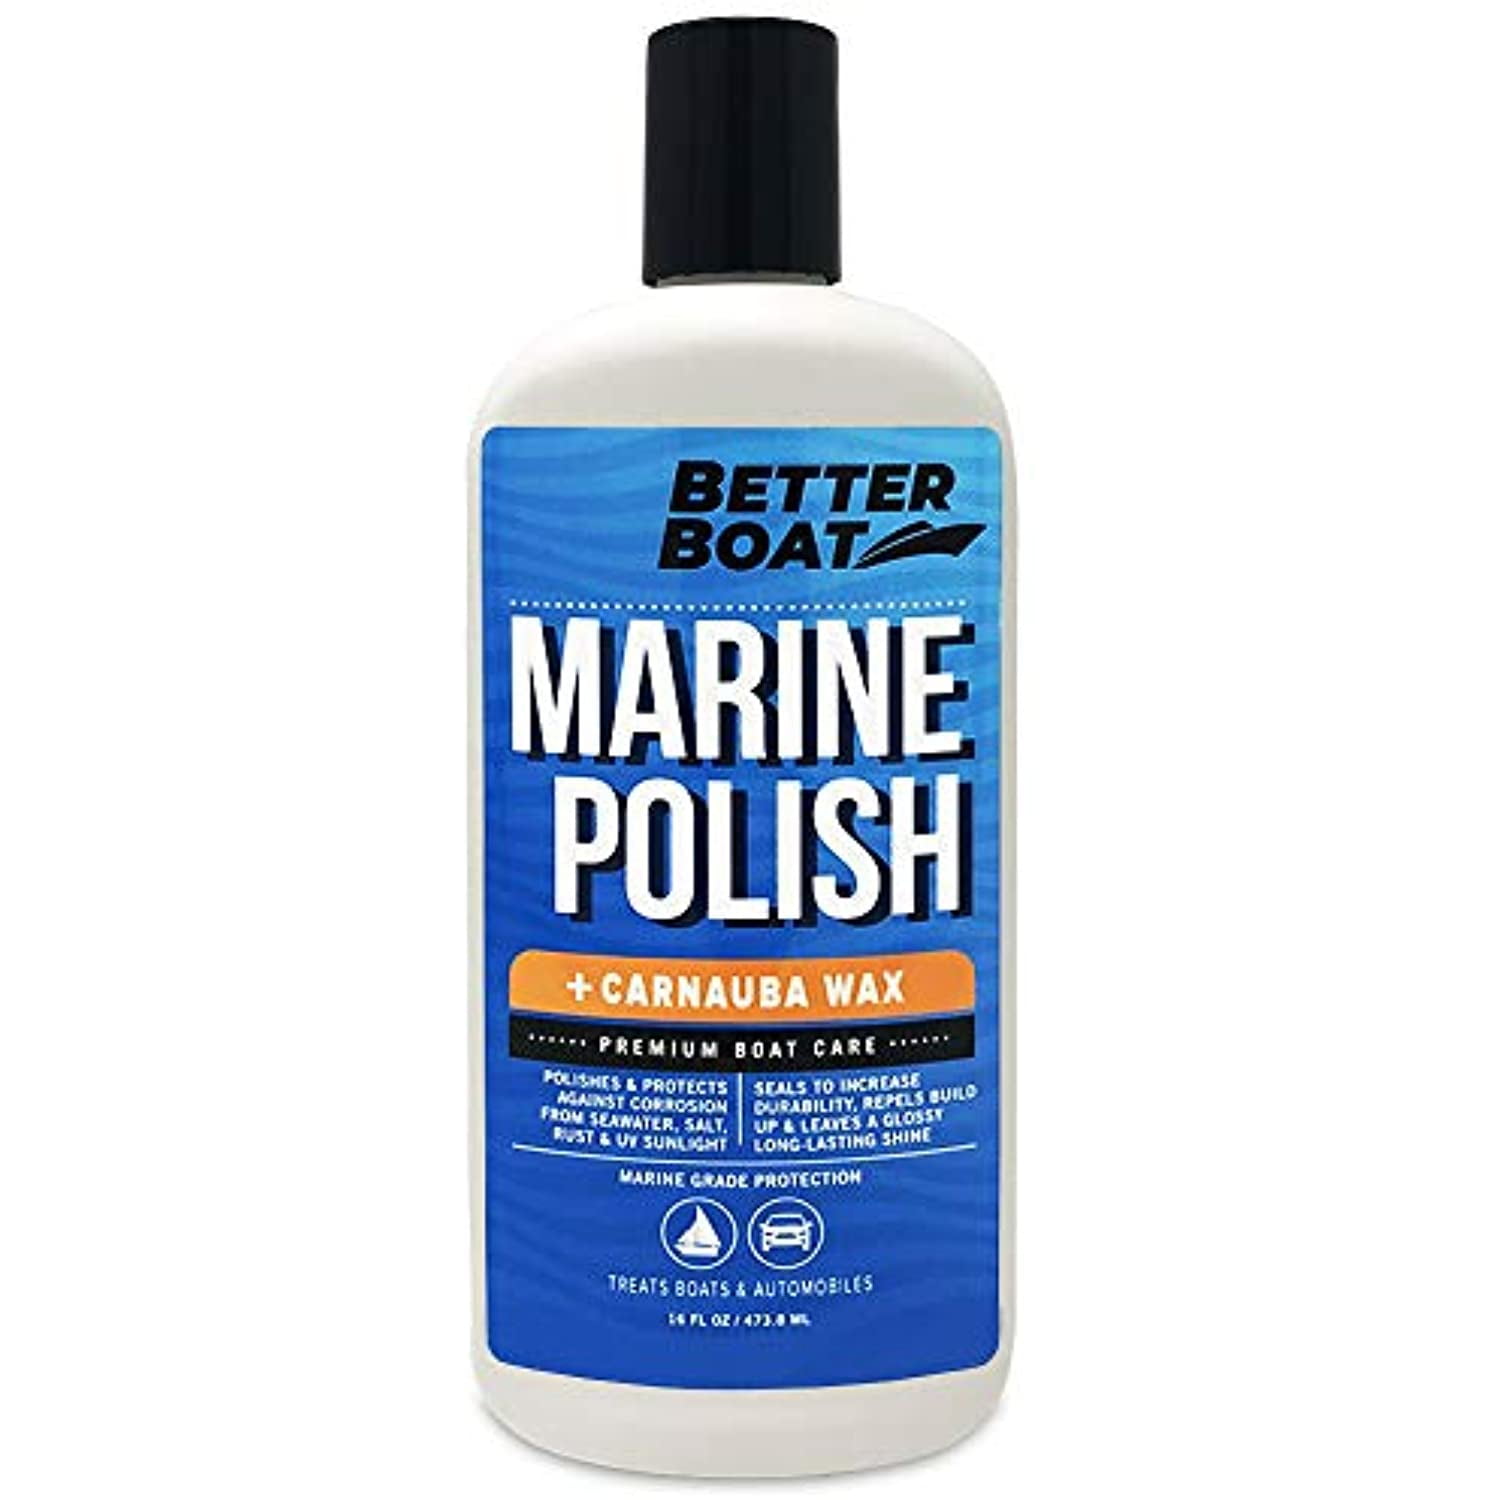 Boat Waxes and Polishes - Boat Life